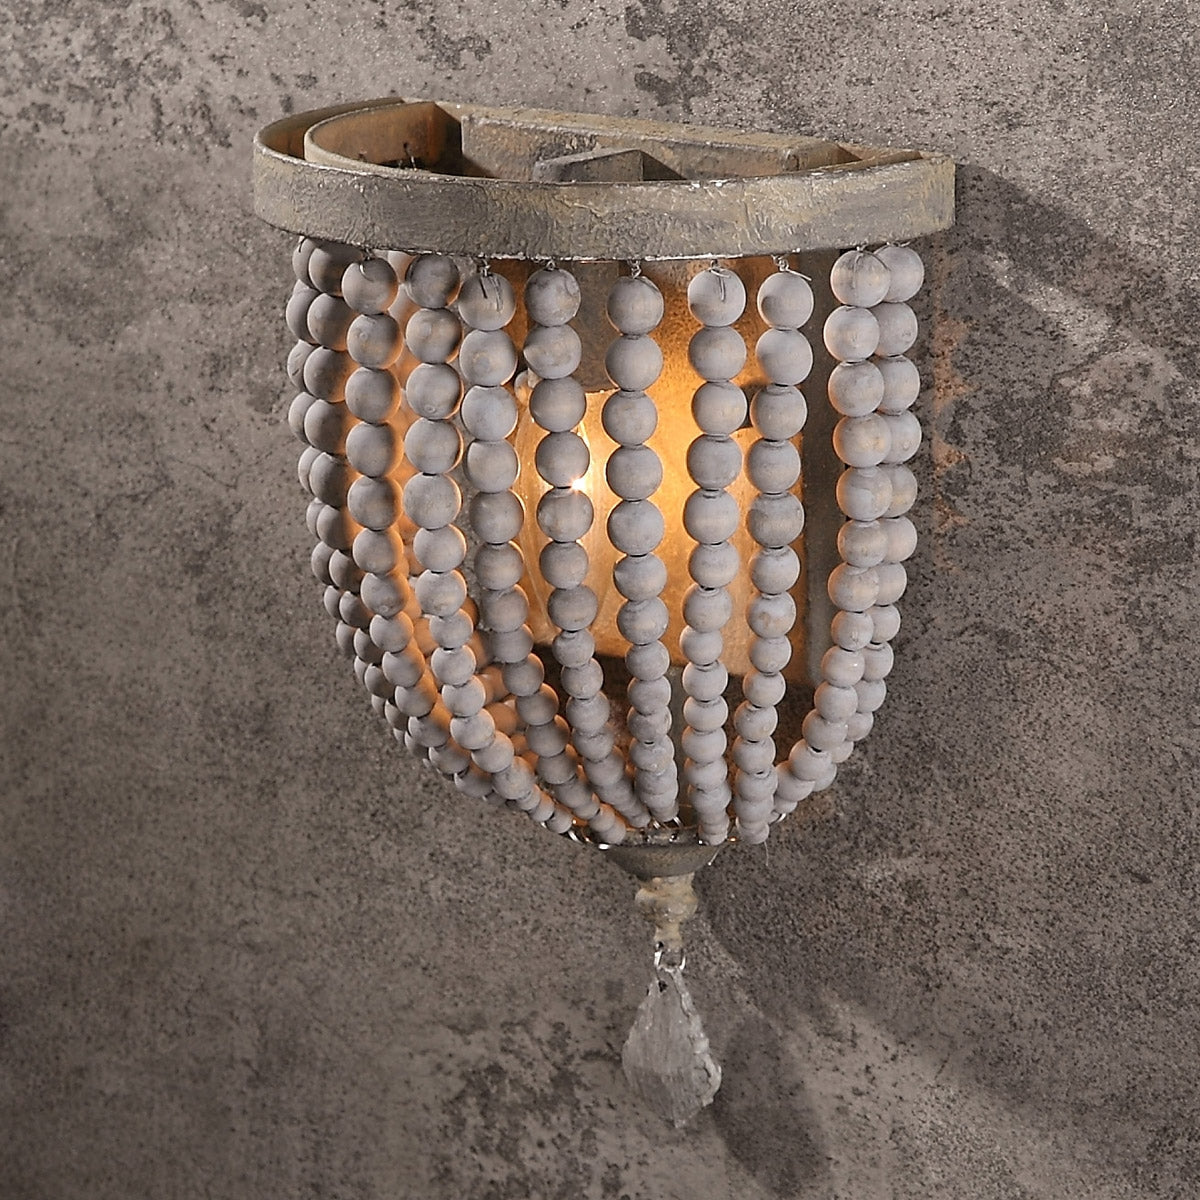 Country Style Single Light Wood Beaded Decorative Indoor Wall Sconce in Distressed